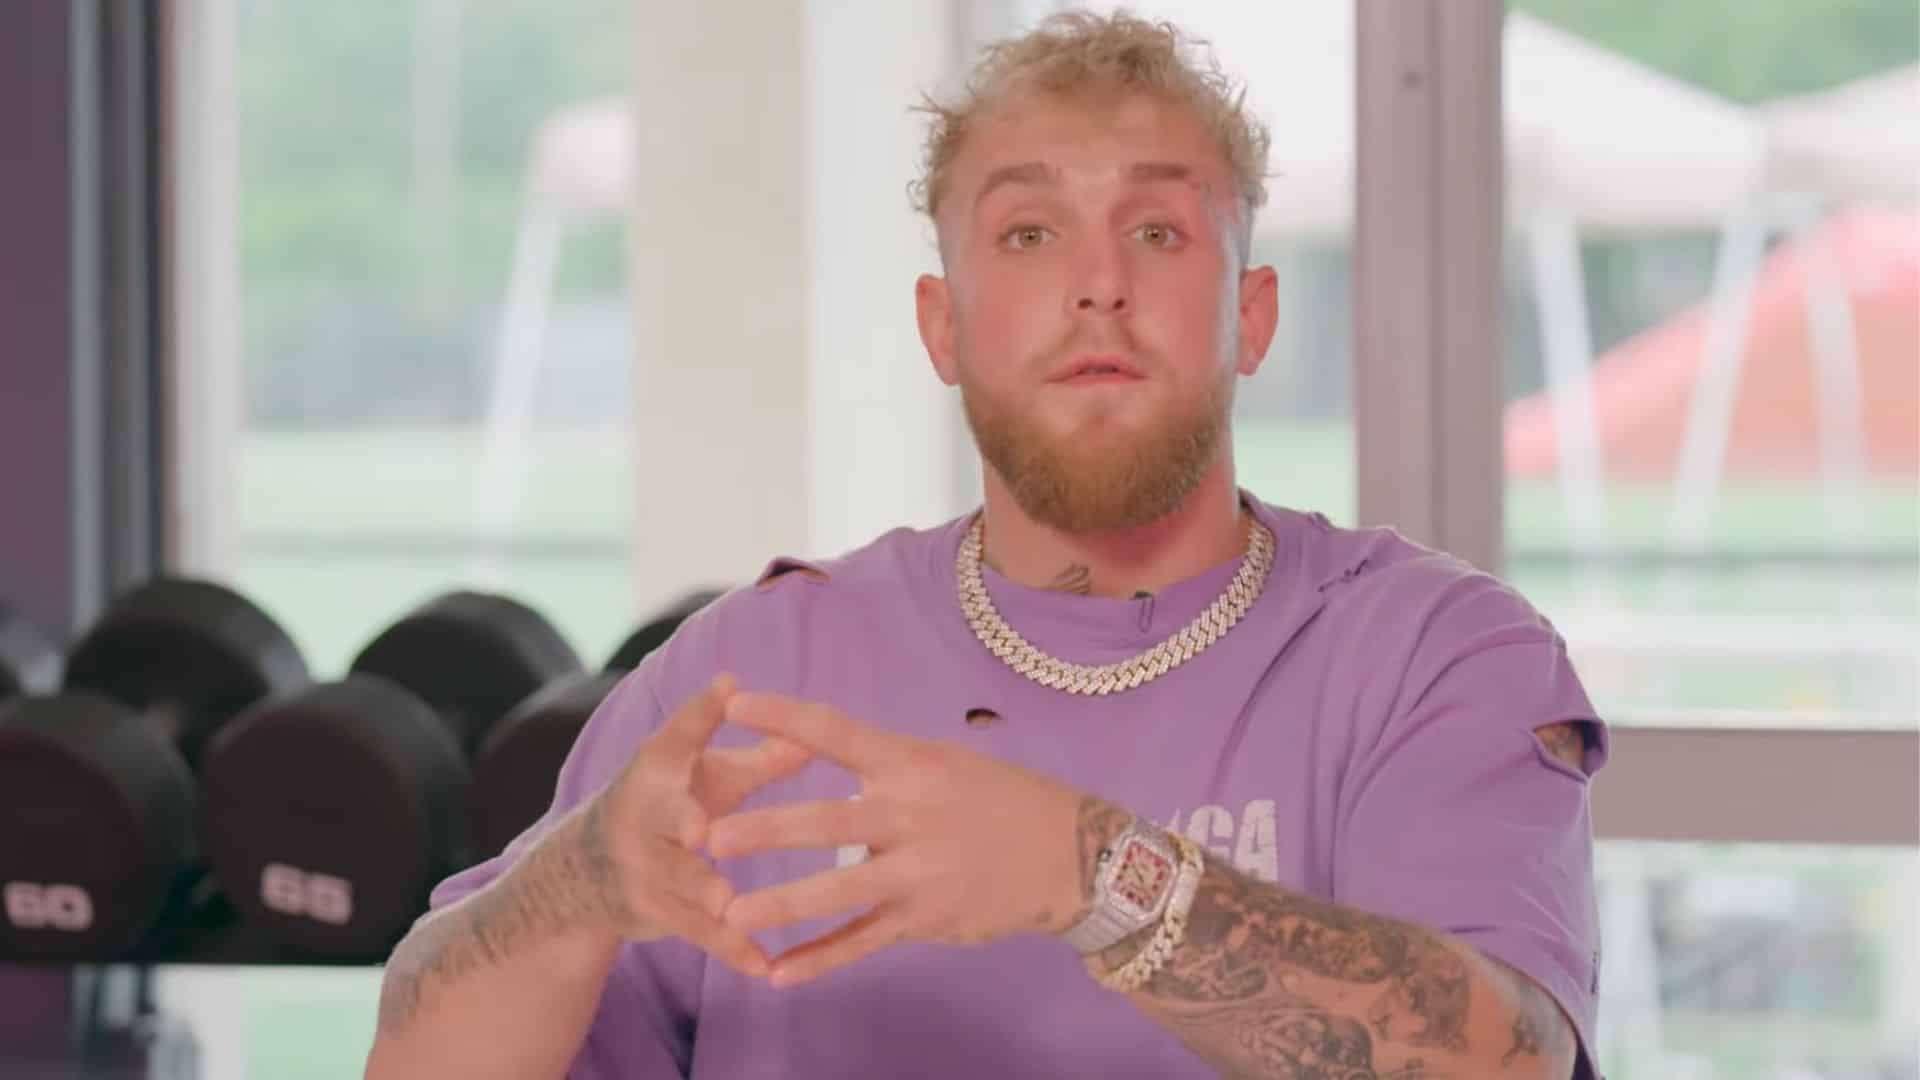 Jake Paul is violet shirt talking to camera with hands closed